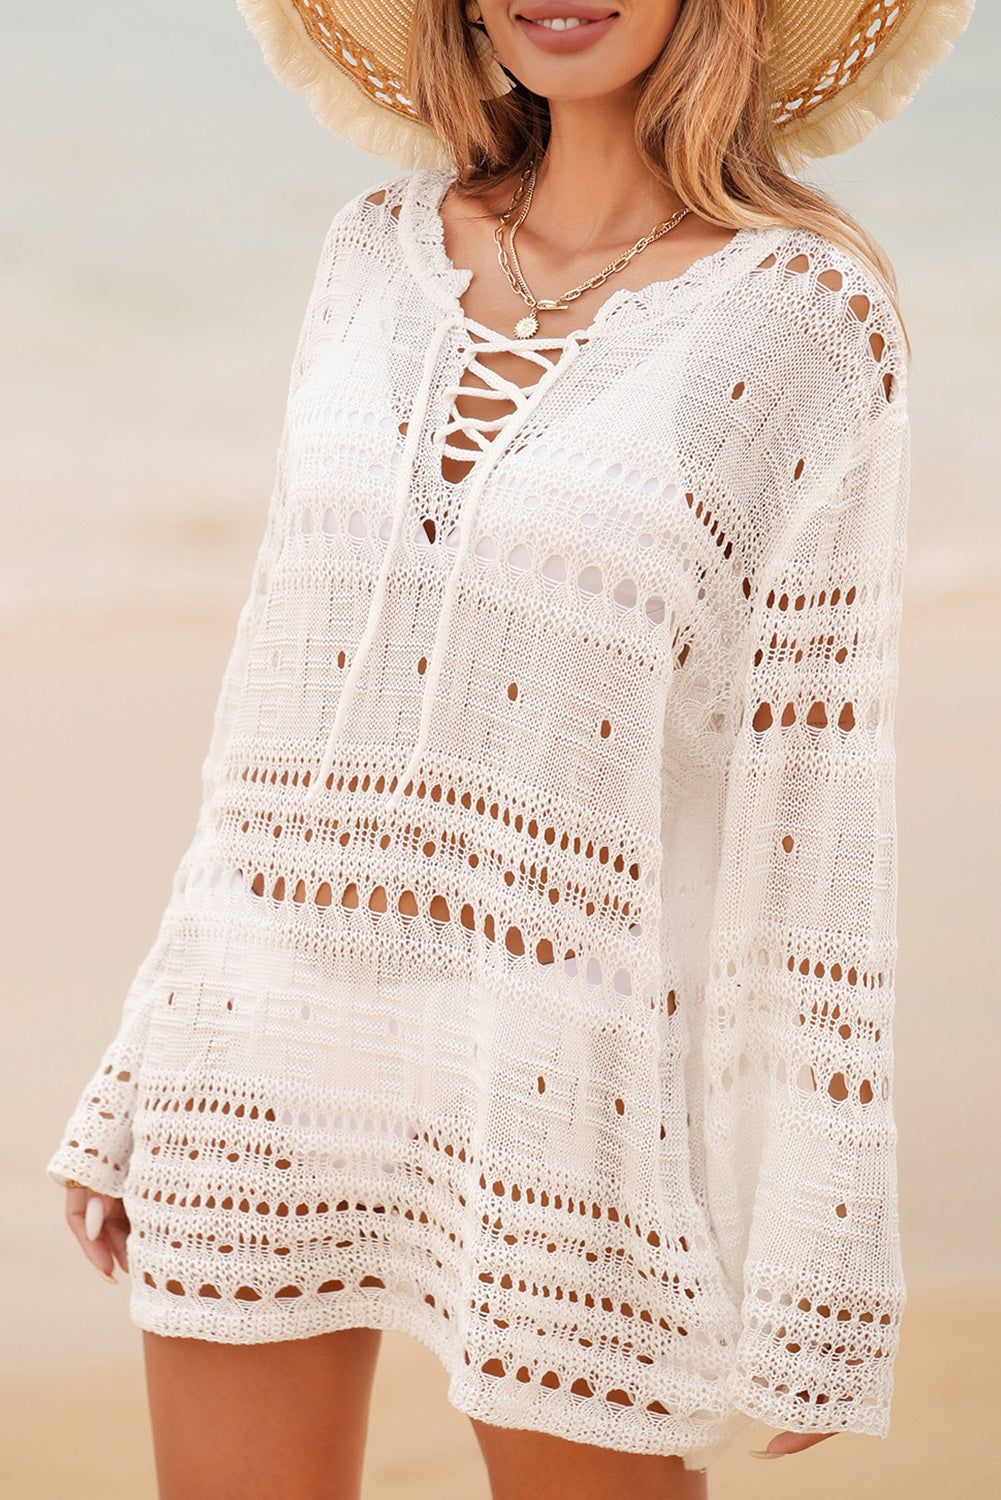 White Lace Up V Neck Hollow Out Knitted Long Sleeve Cover Up - Babbazon Cover-ups